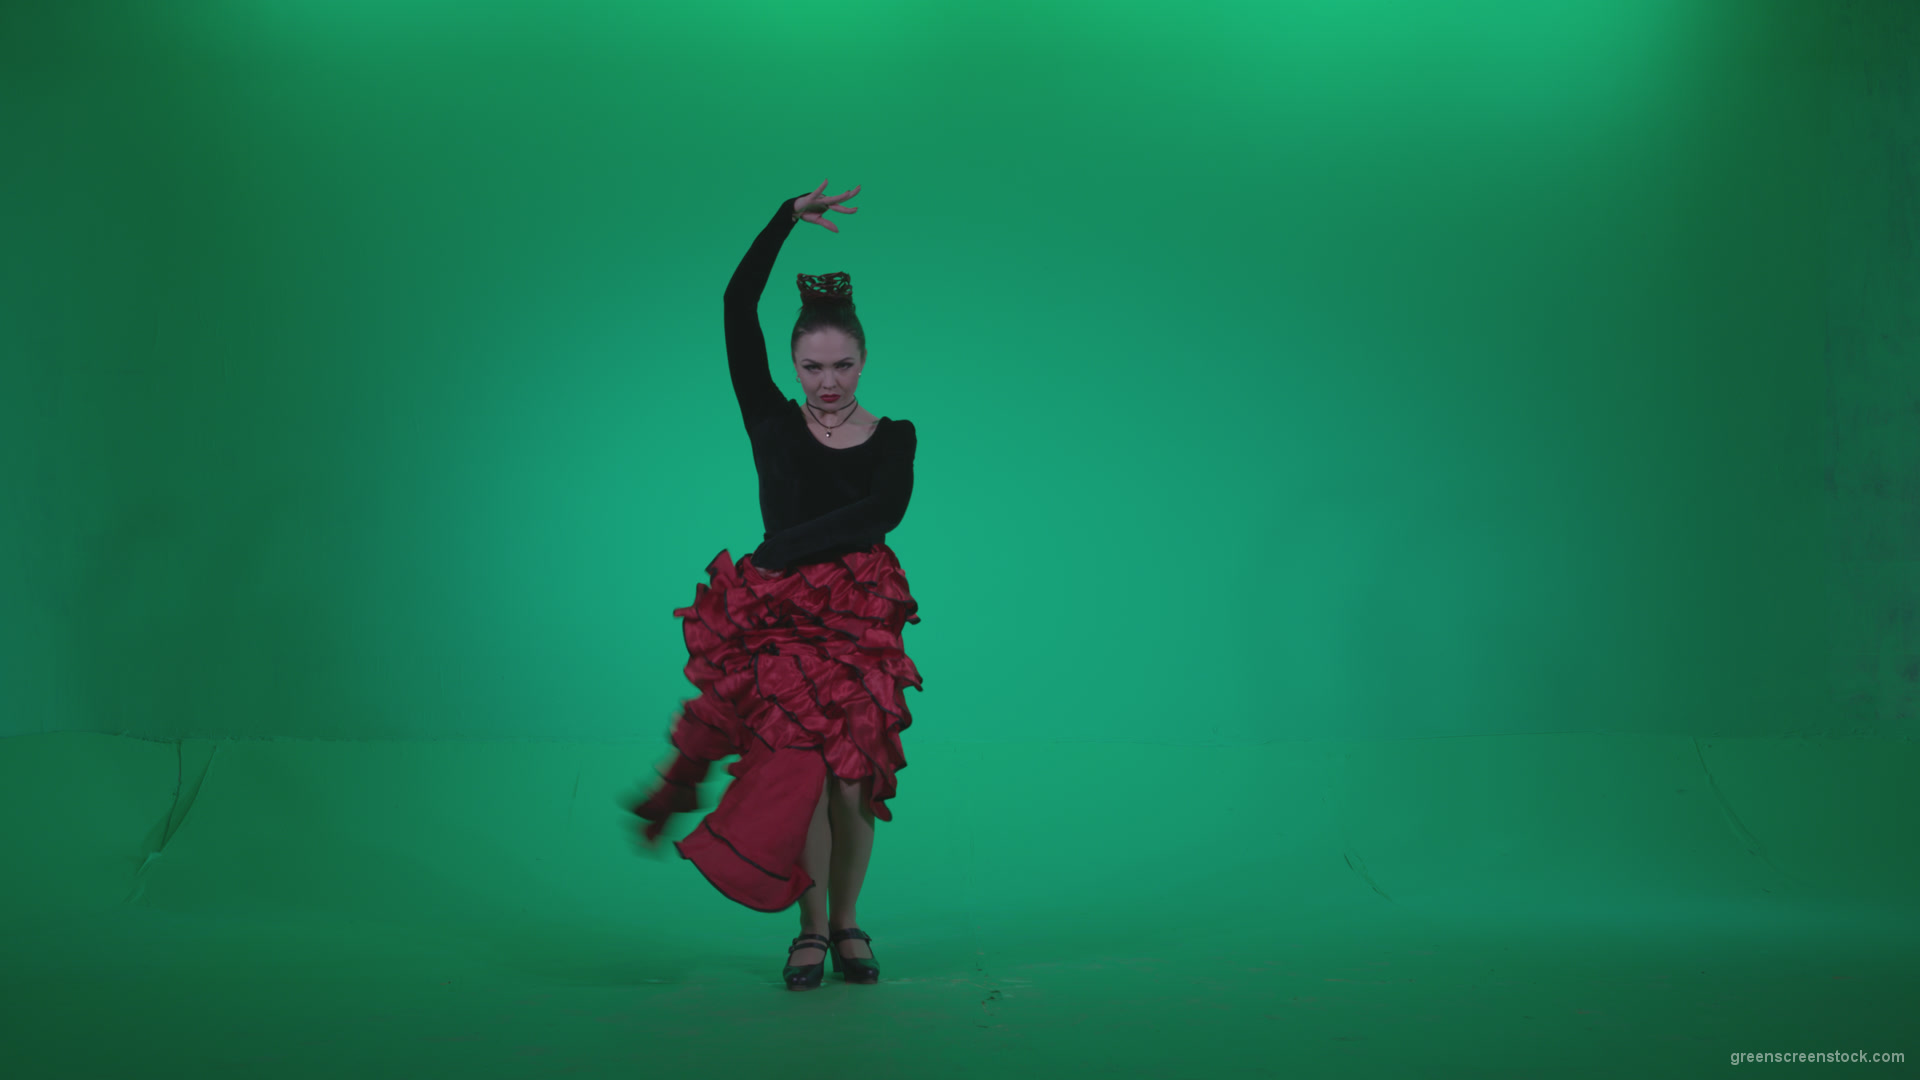 Flamenco-Red-and-Black-Dress-rb6-Green-Screen-Video-Footage_007 Green Screen Stock